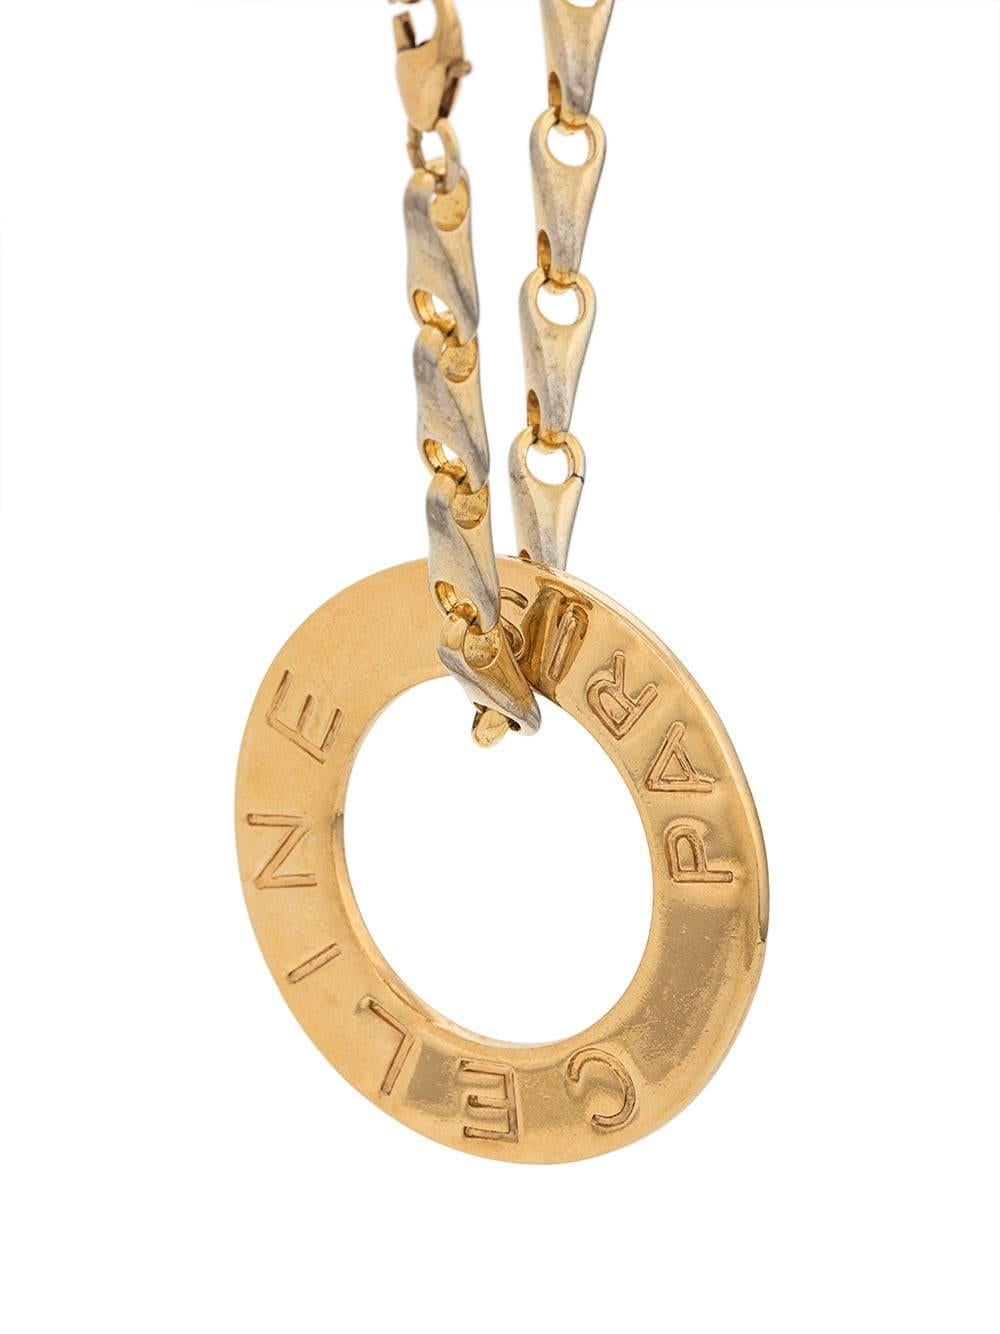 Crafted from antique gold-toned metal hardware, this elegant, pre-owned necklace from Céline is a unique piece that adds a touch of classic sophistication to any outfit with an elegant disc pendant, an engraved logo and a lobster clasp closure. This